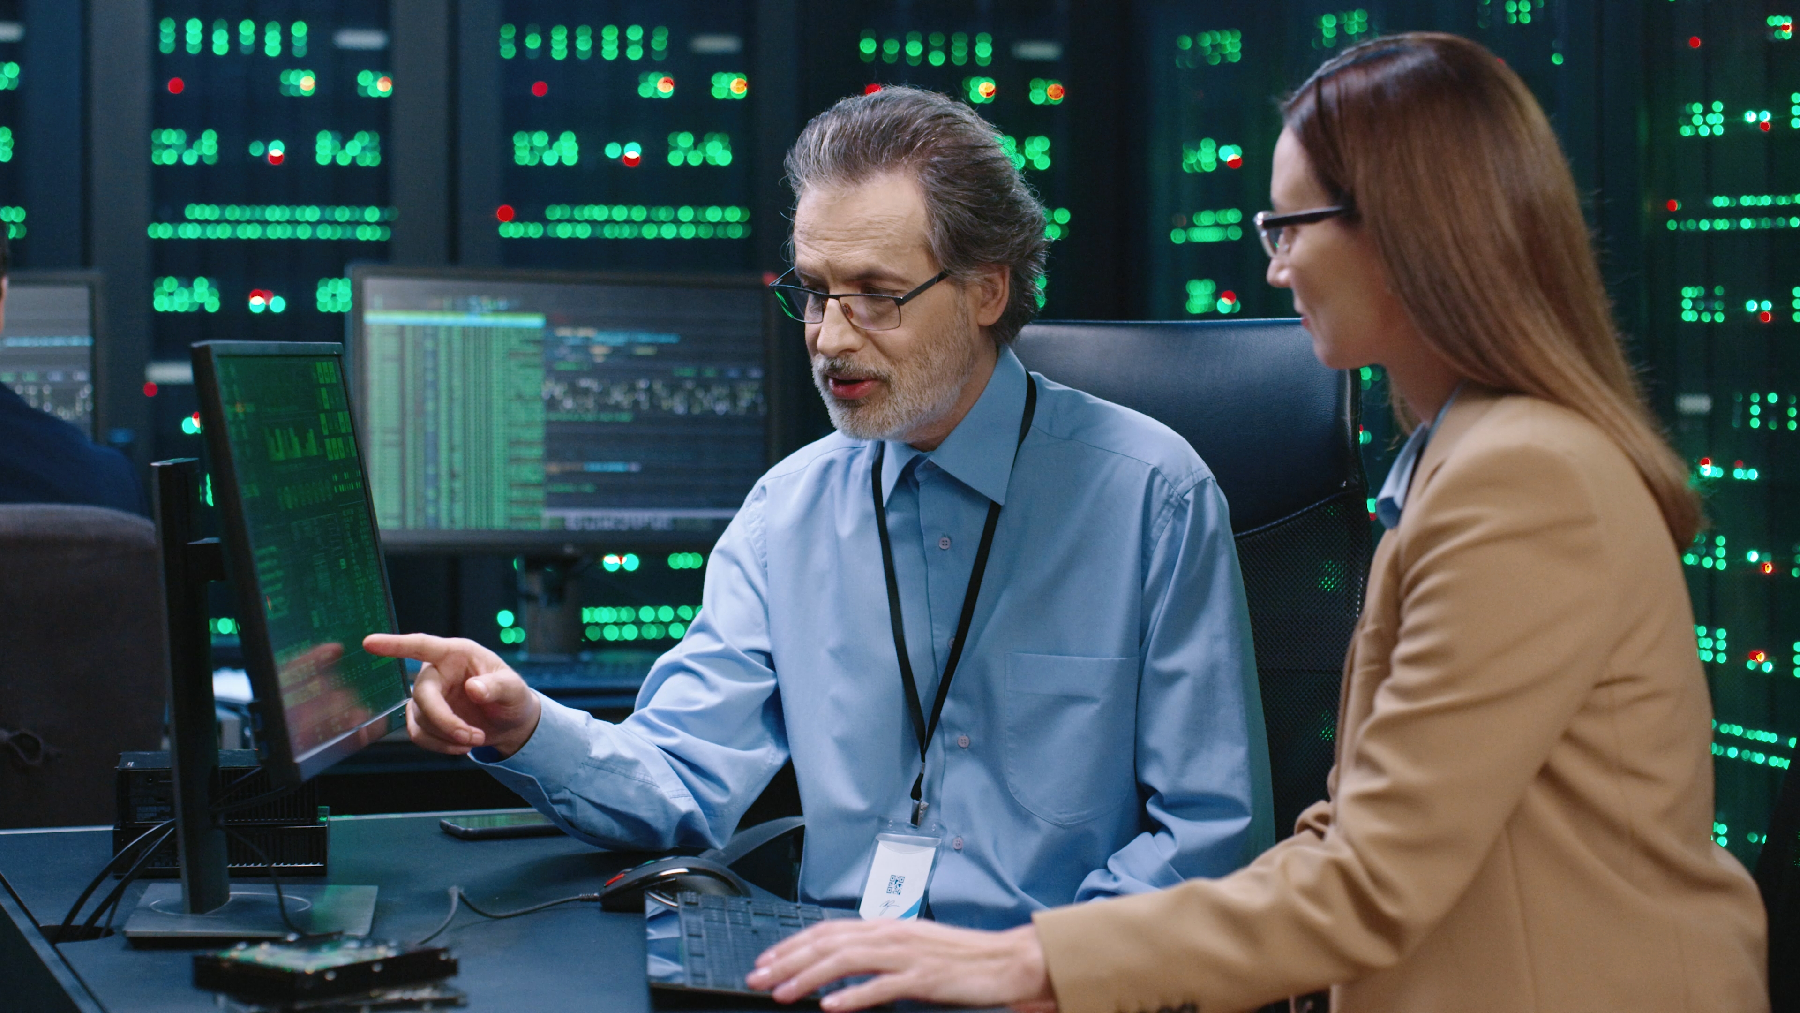 A stock image of two colleagues working in a data center